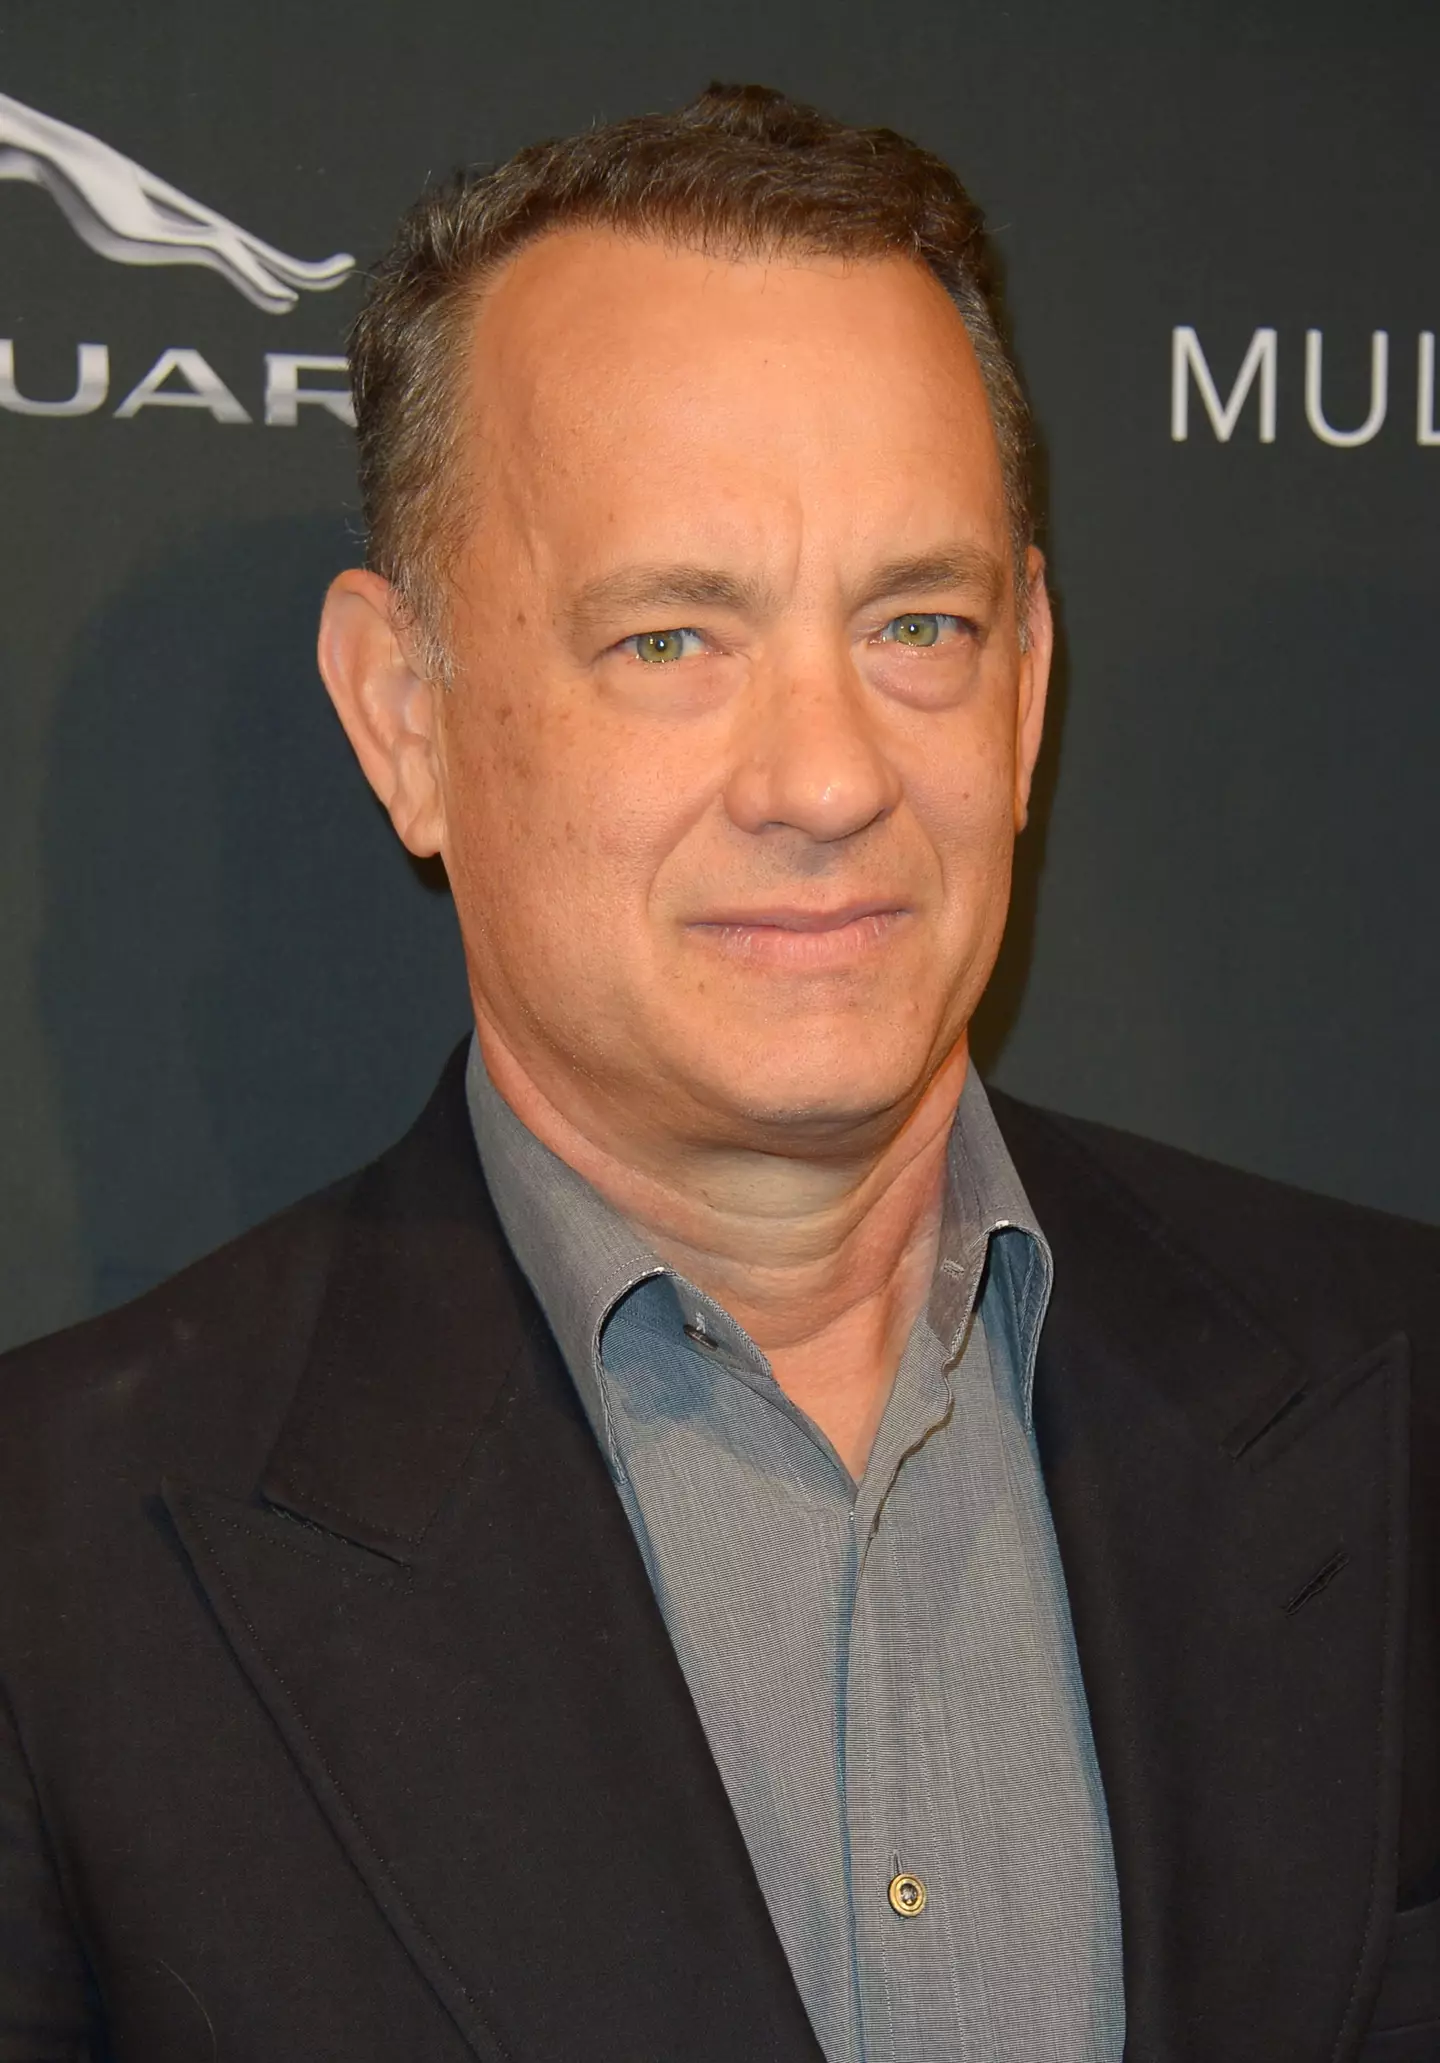 Tom Hanks has been in movies for over four decades.